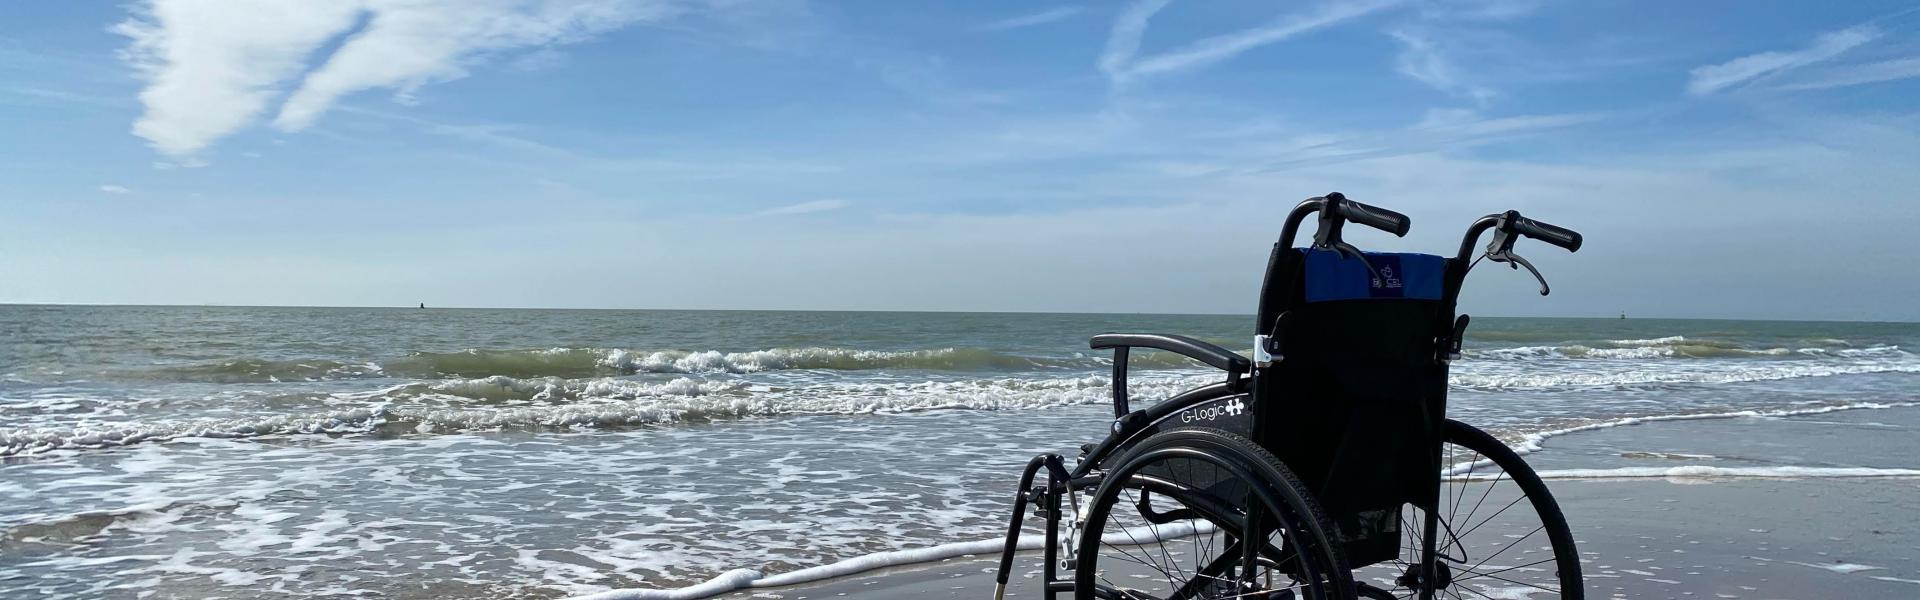 black and gray wheelchair on beach during daytime